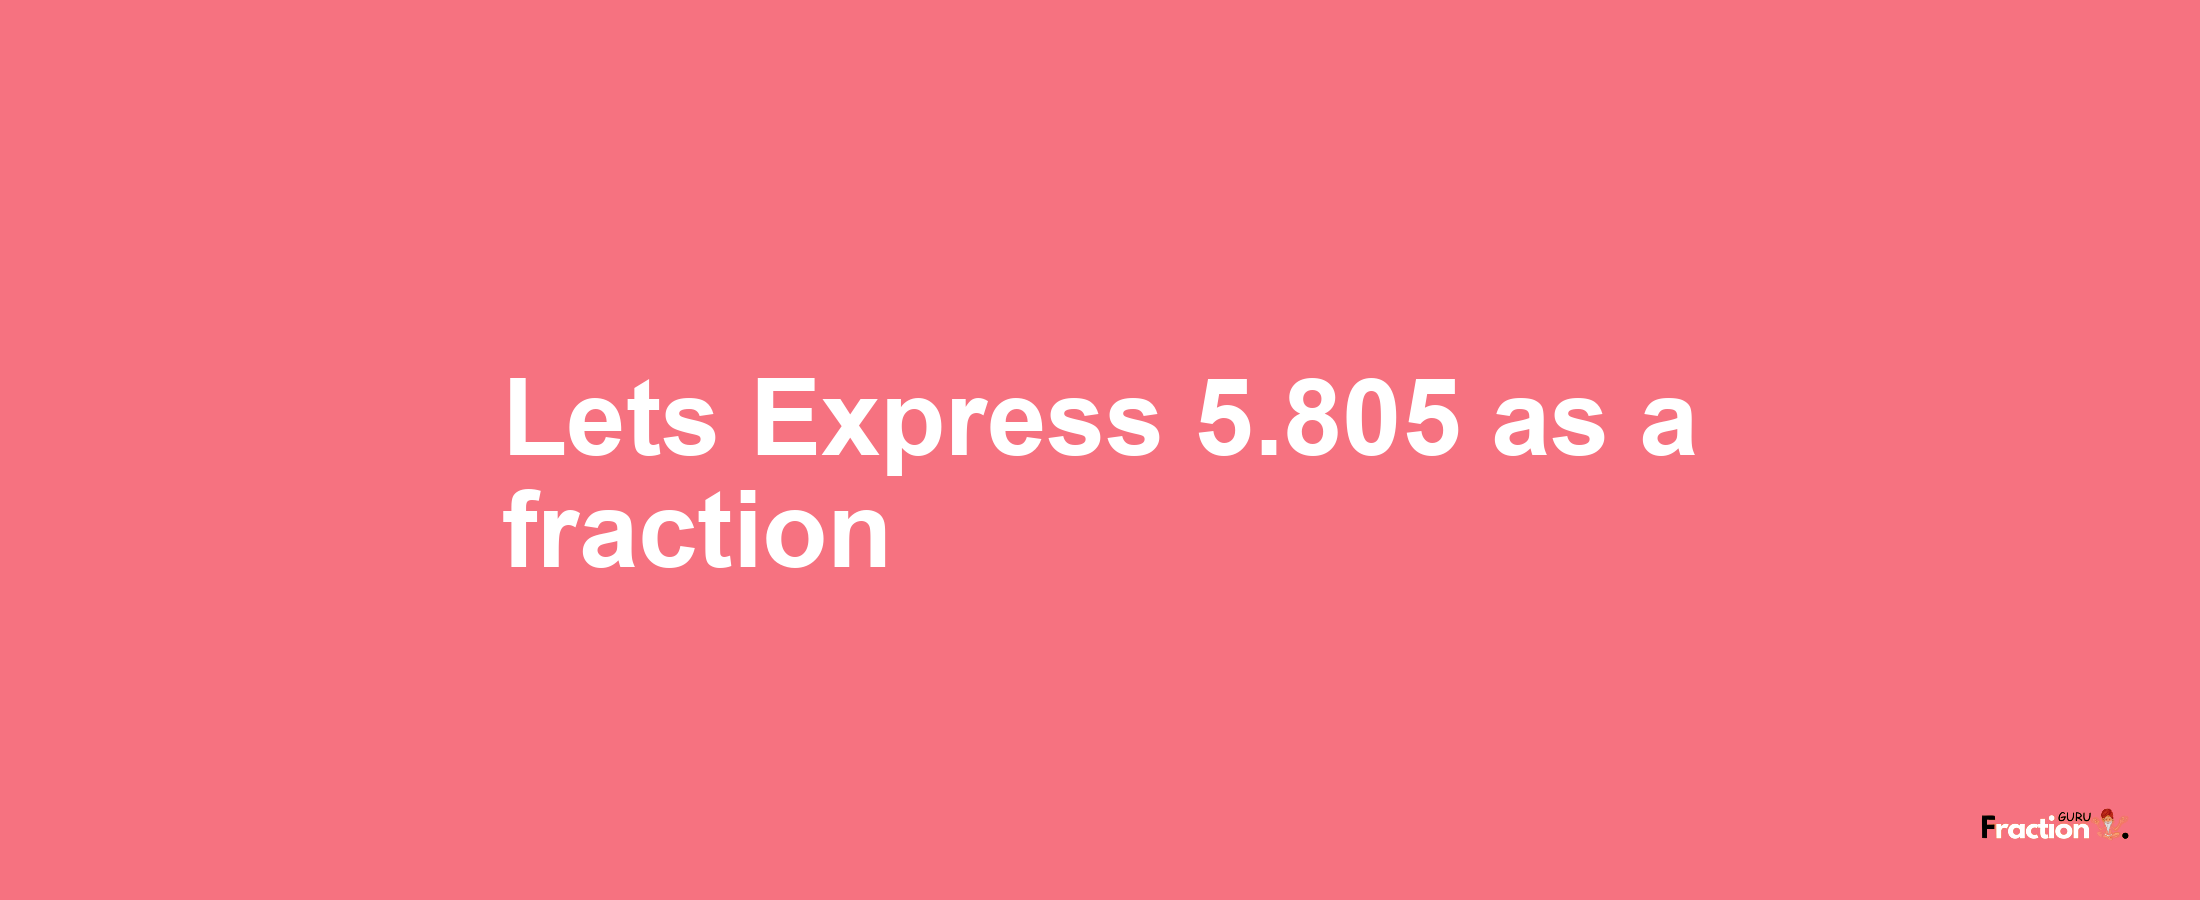 Lets Express 5.805 as afraction